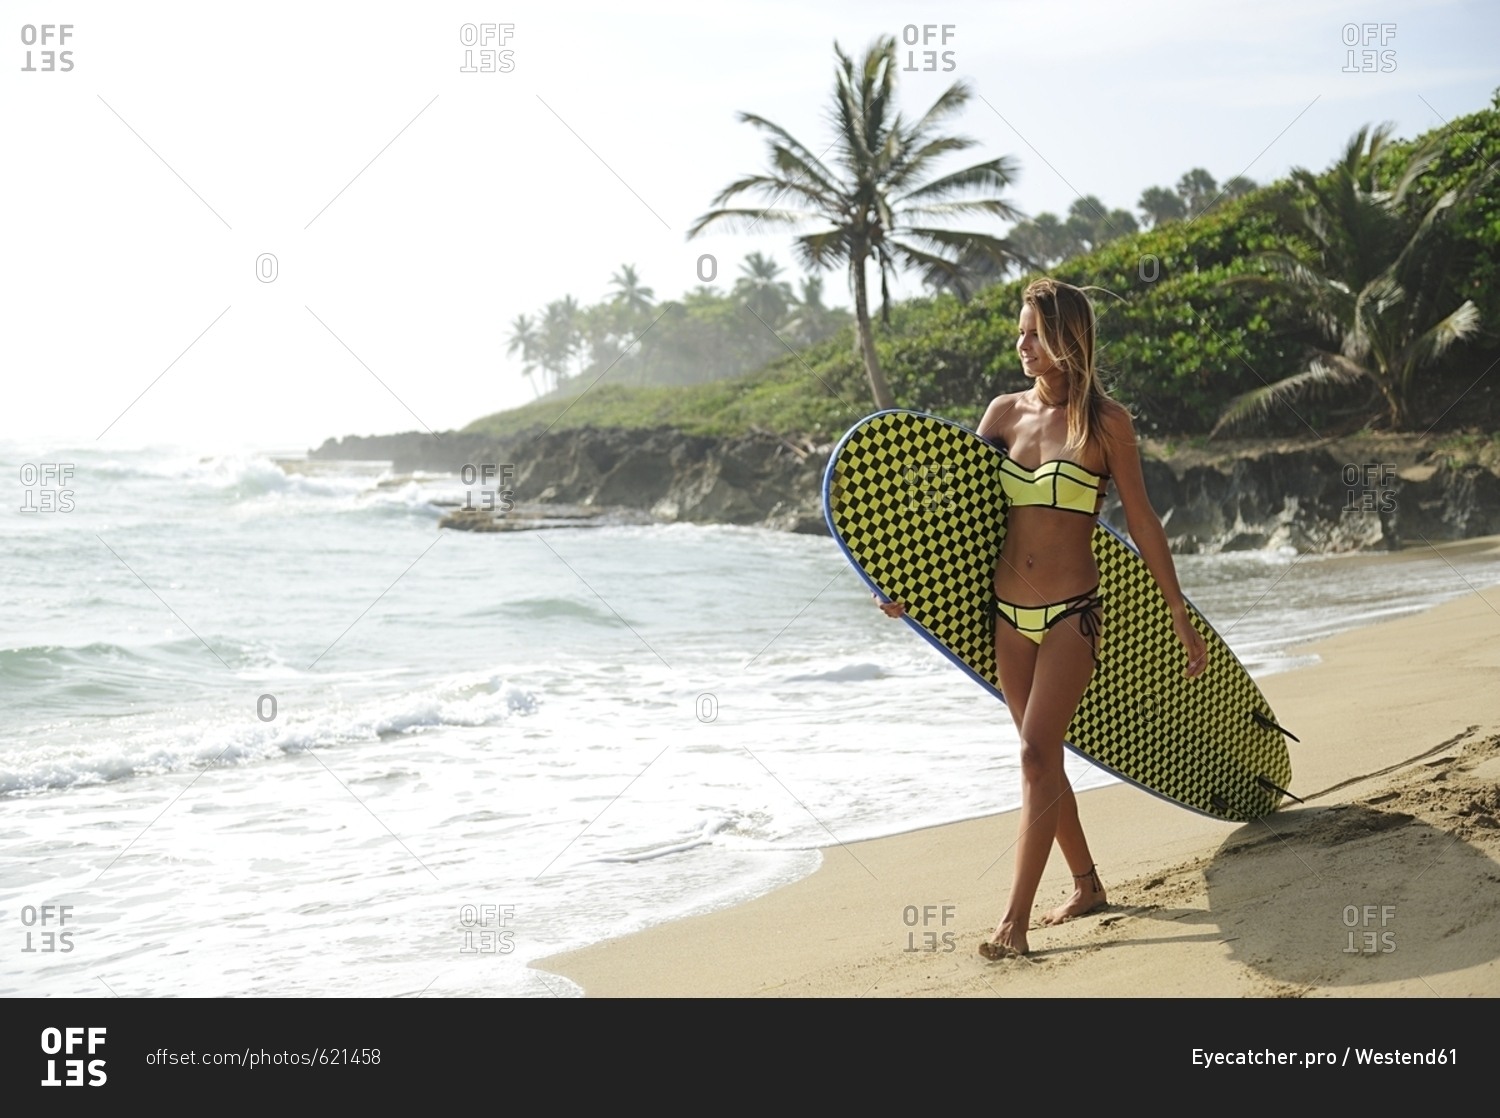 Woman on the beach with surfboard